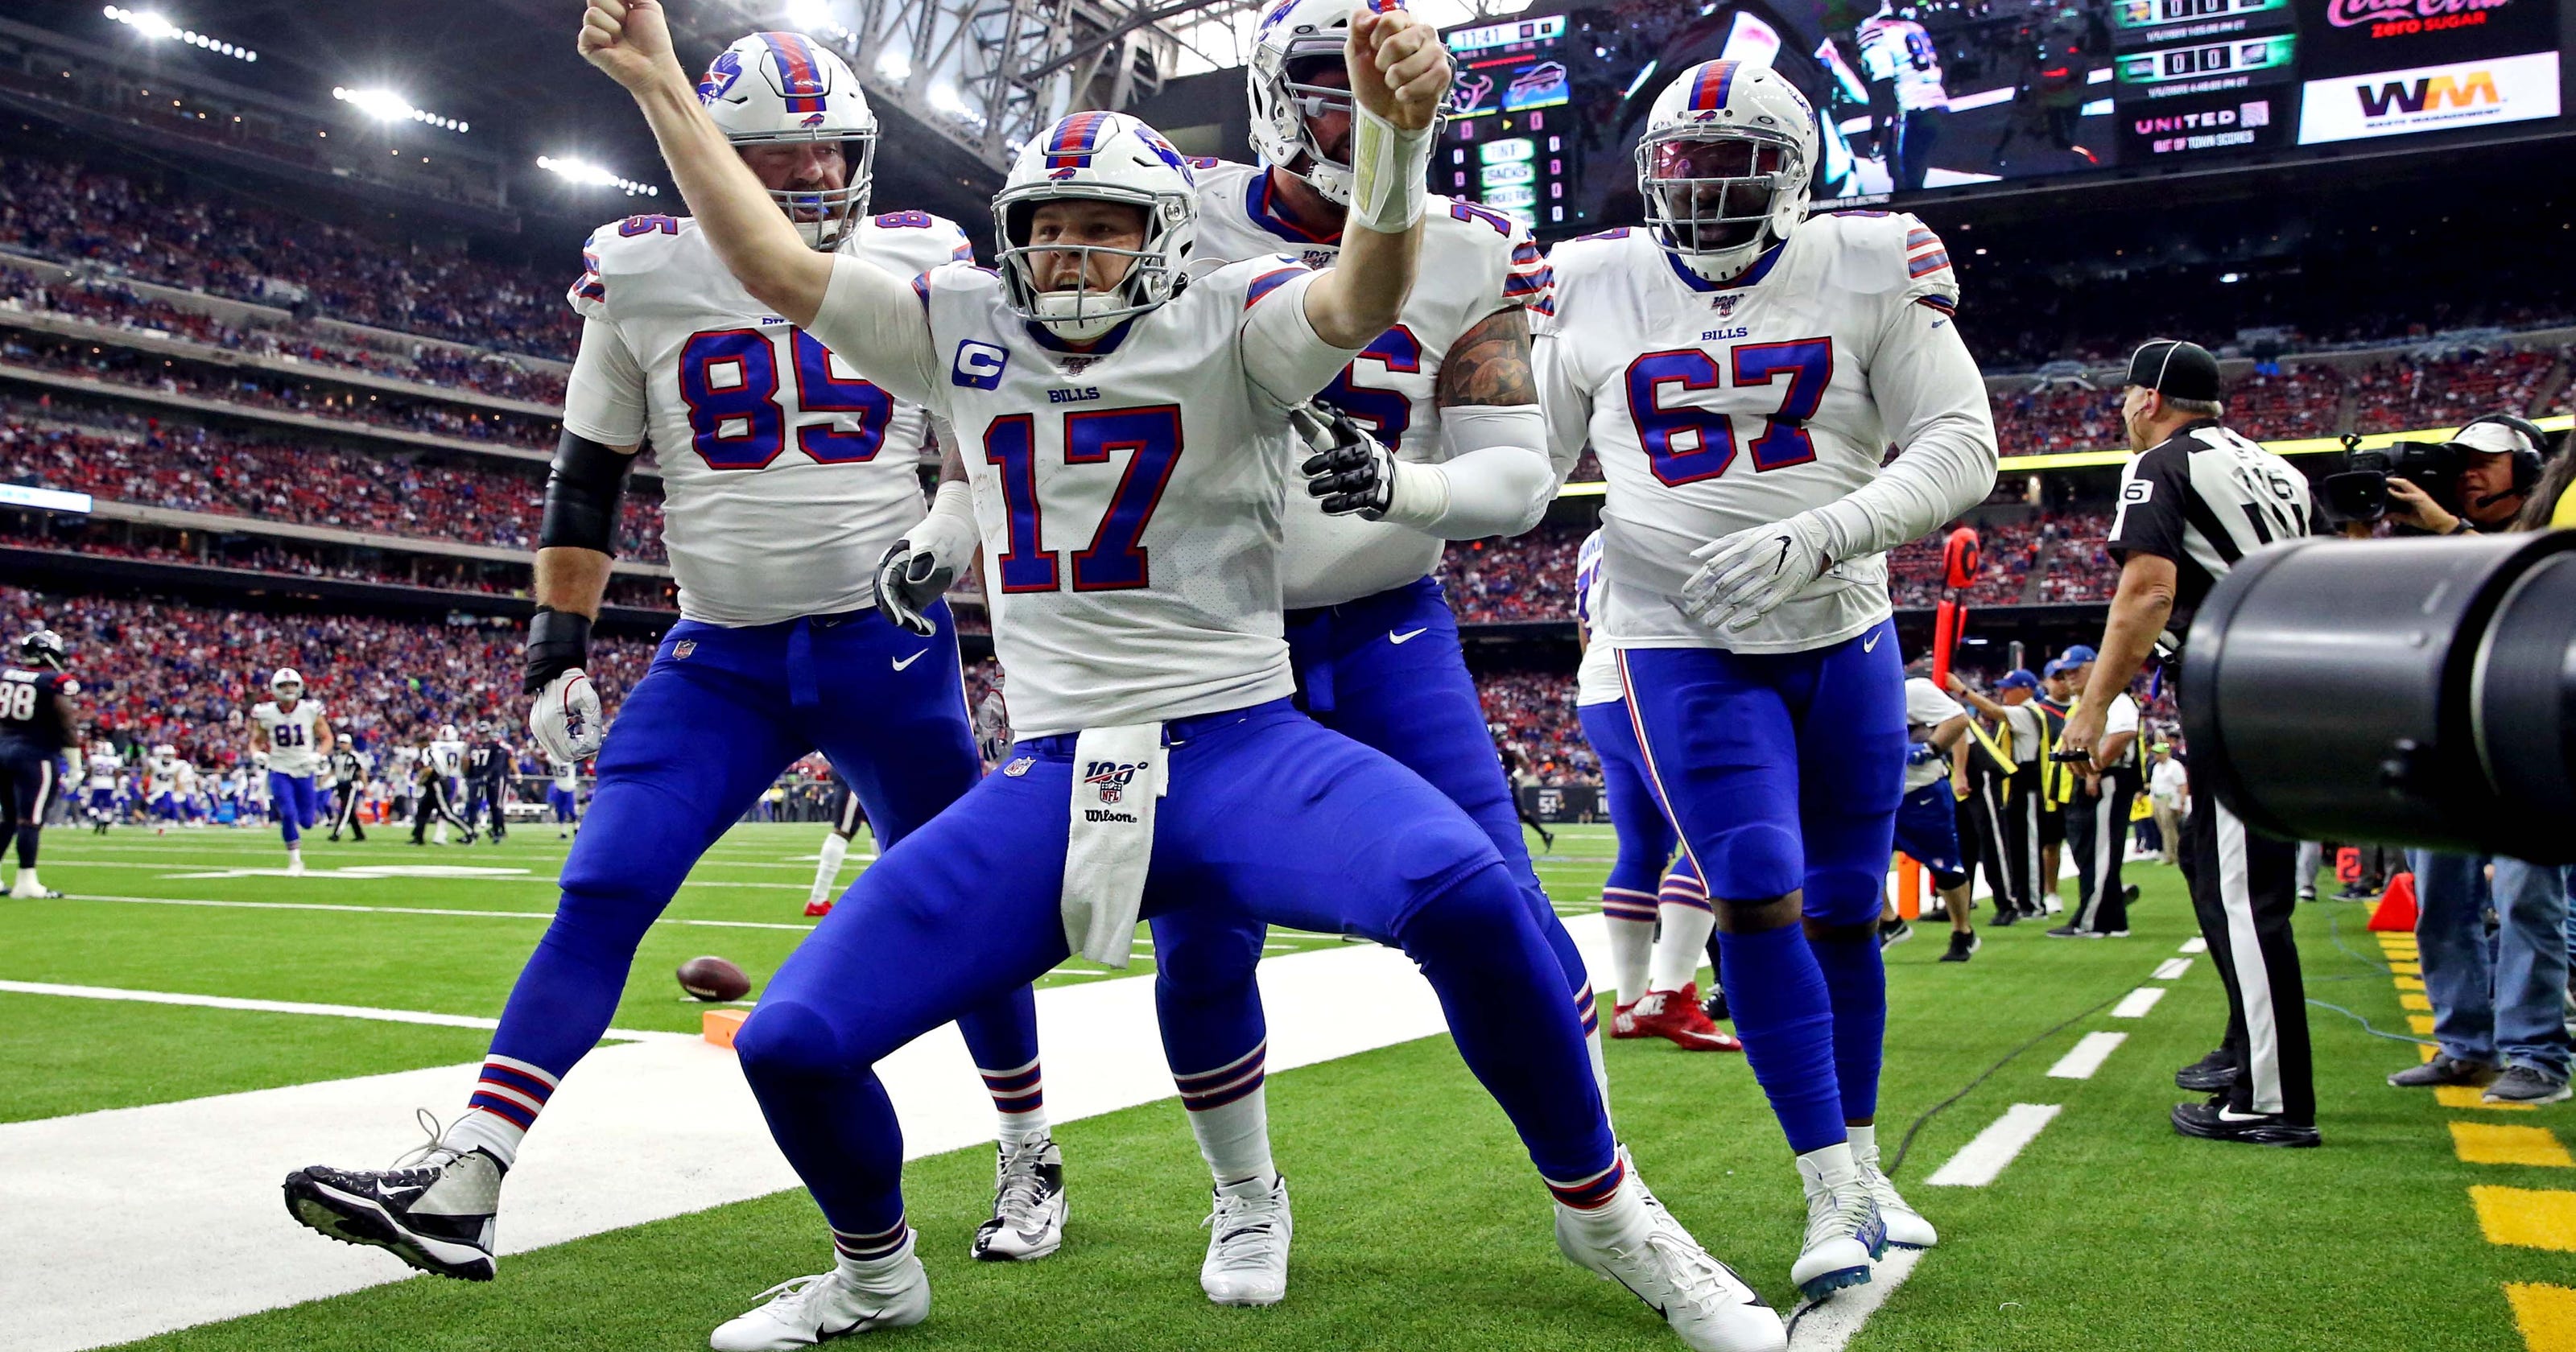 Buffalo Bills 2020 schedule Full listing of dates, times, TV, opponents